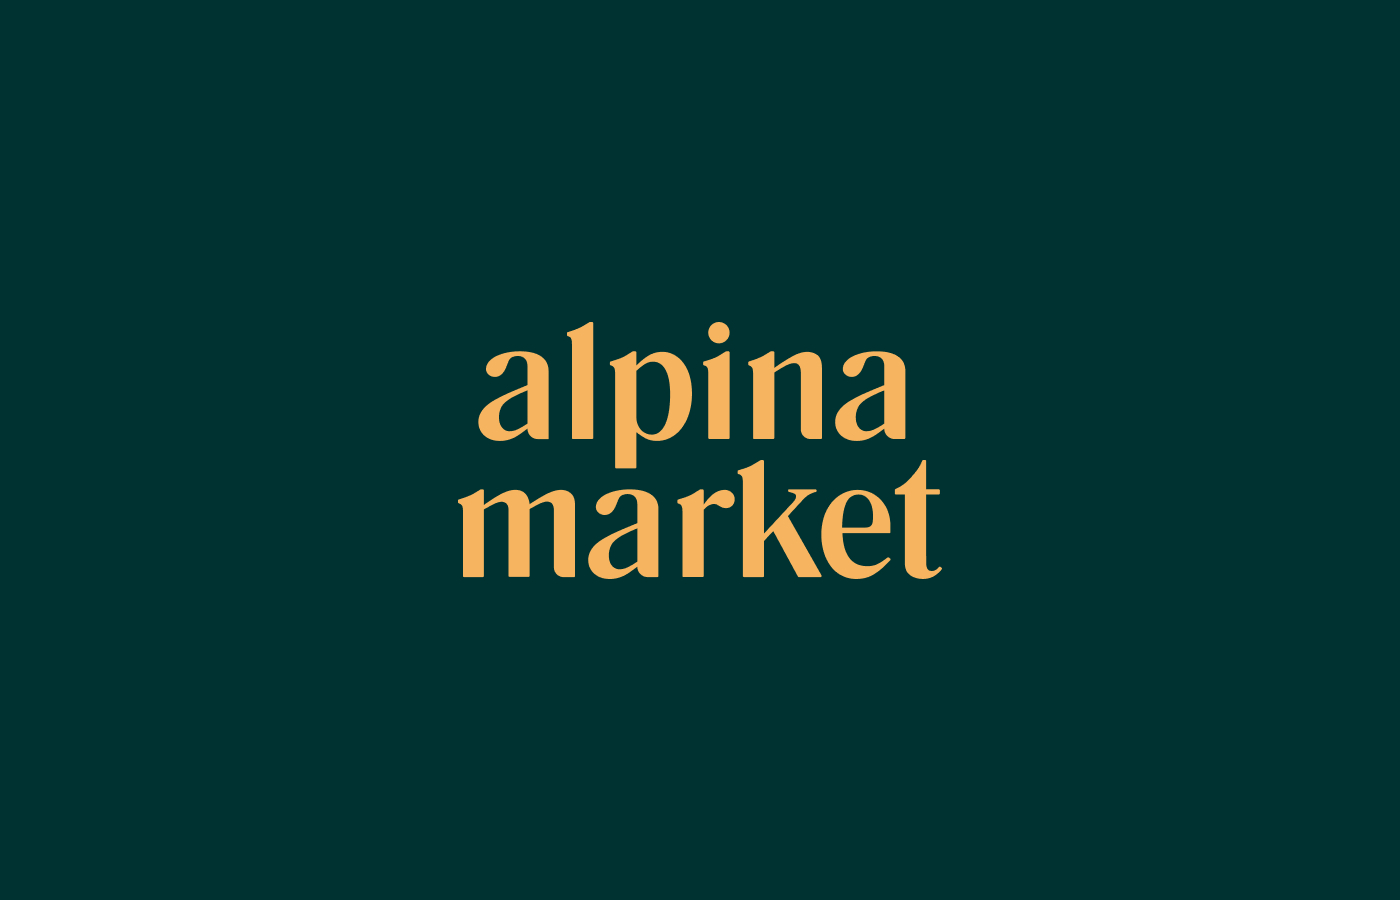 Alpina Market Furniture Factory Branding Created by Severnii Design